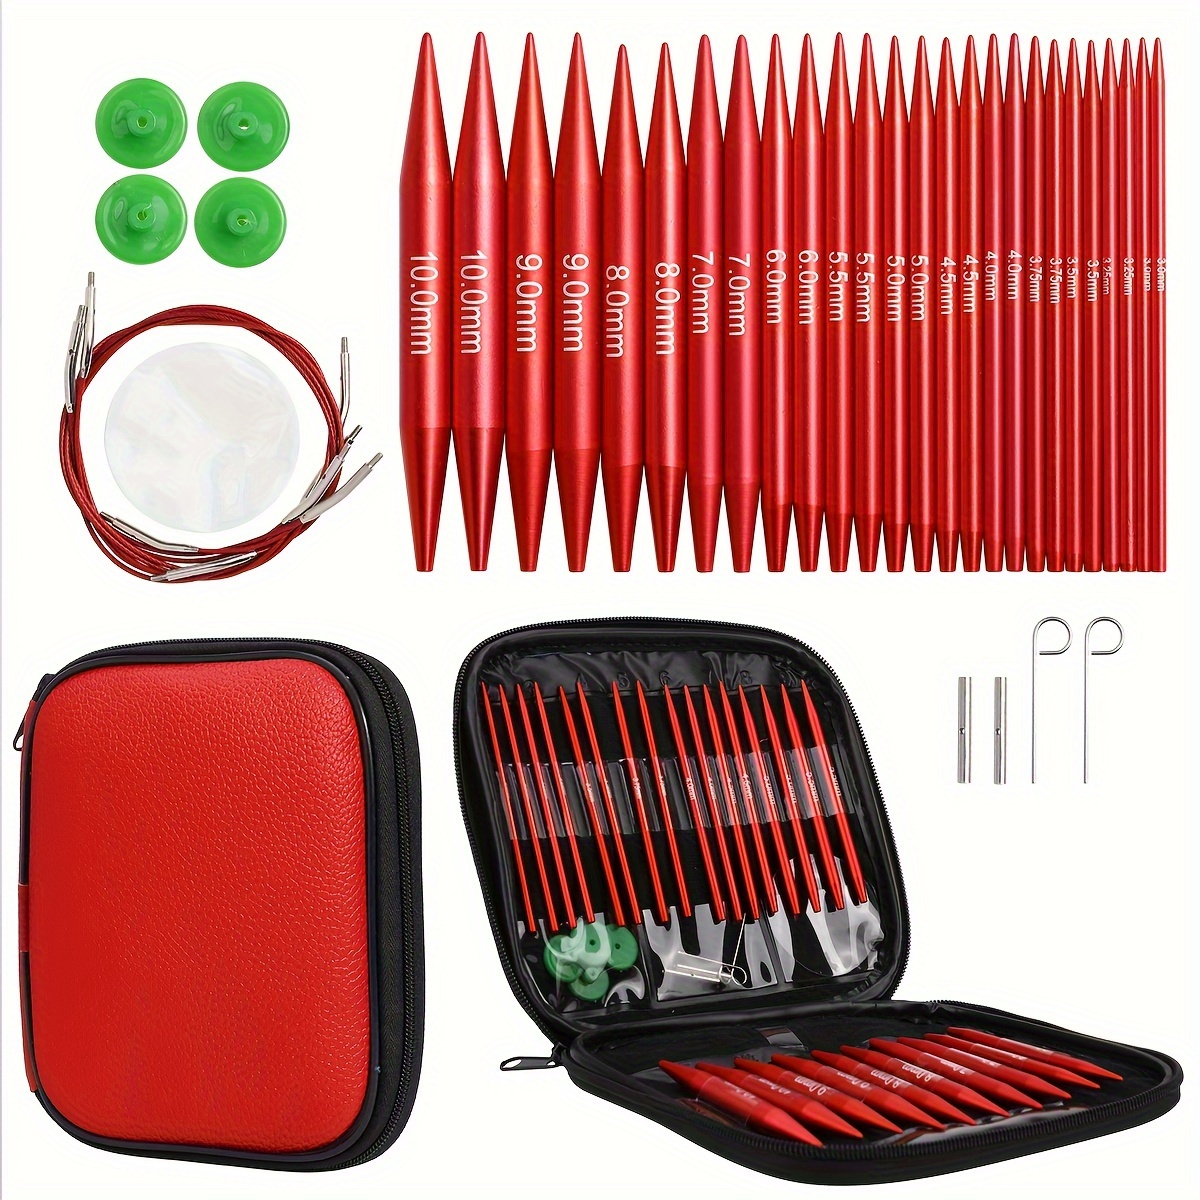 13 Pair Circular Knitting Needle Set 3.0~10.0mm, Aluminum Interchangeable  Knitting Needles with Accessories & Case,Valentines Day Gifts